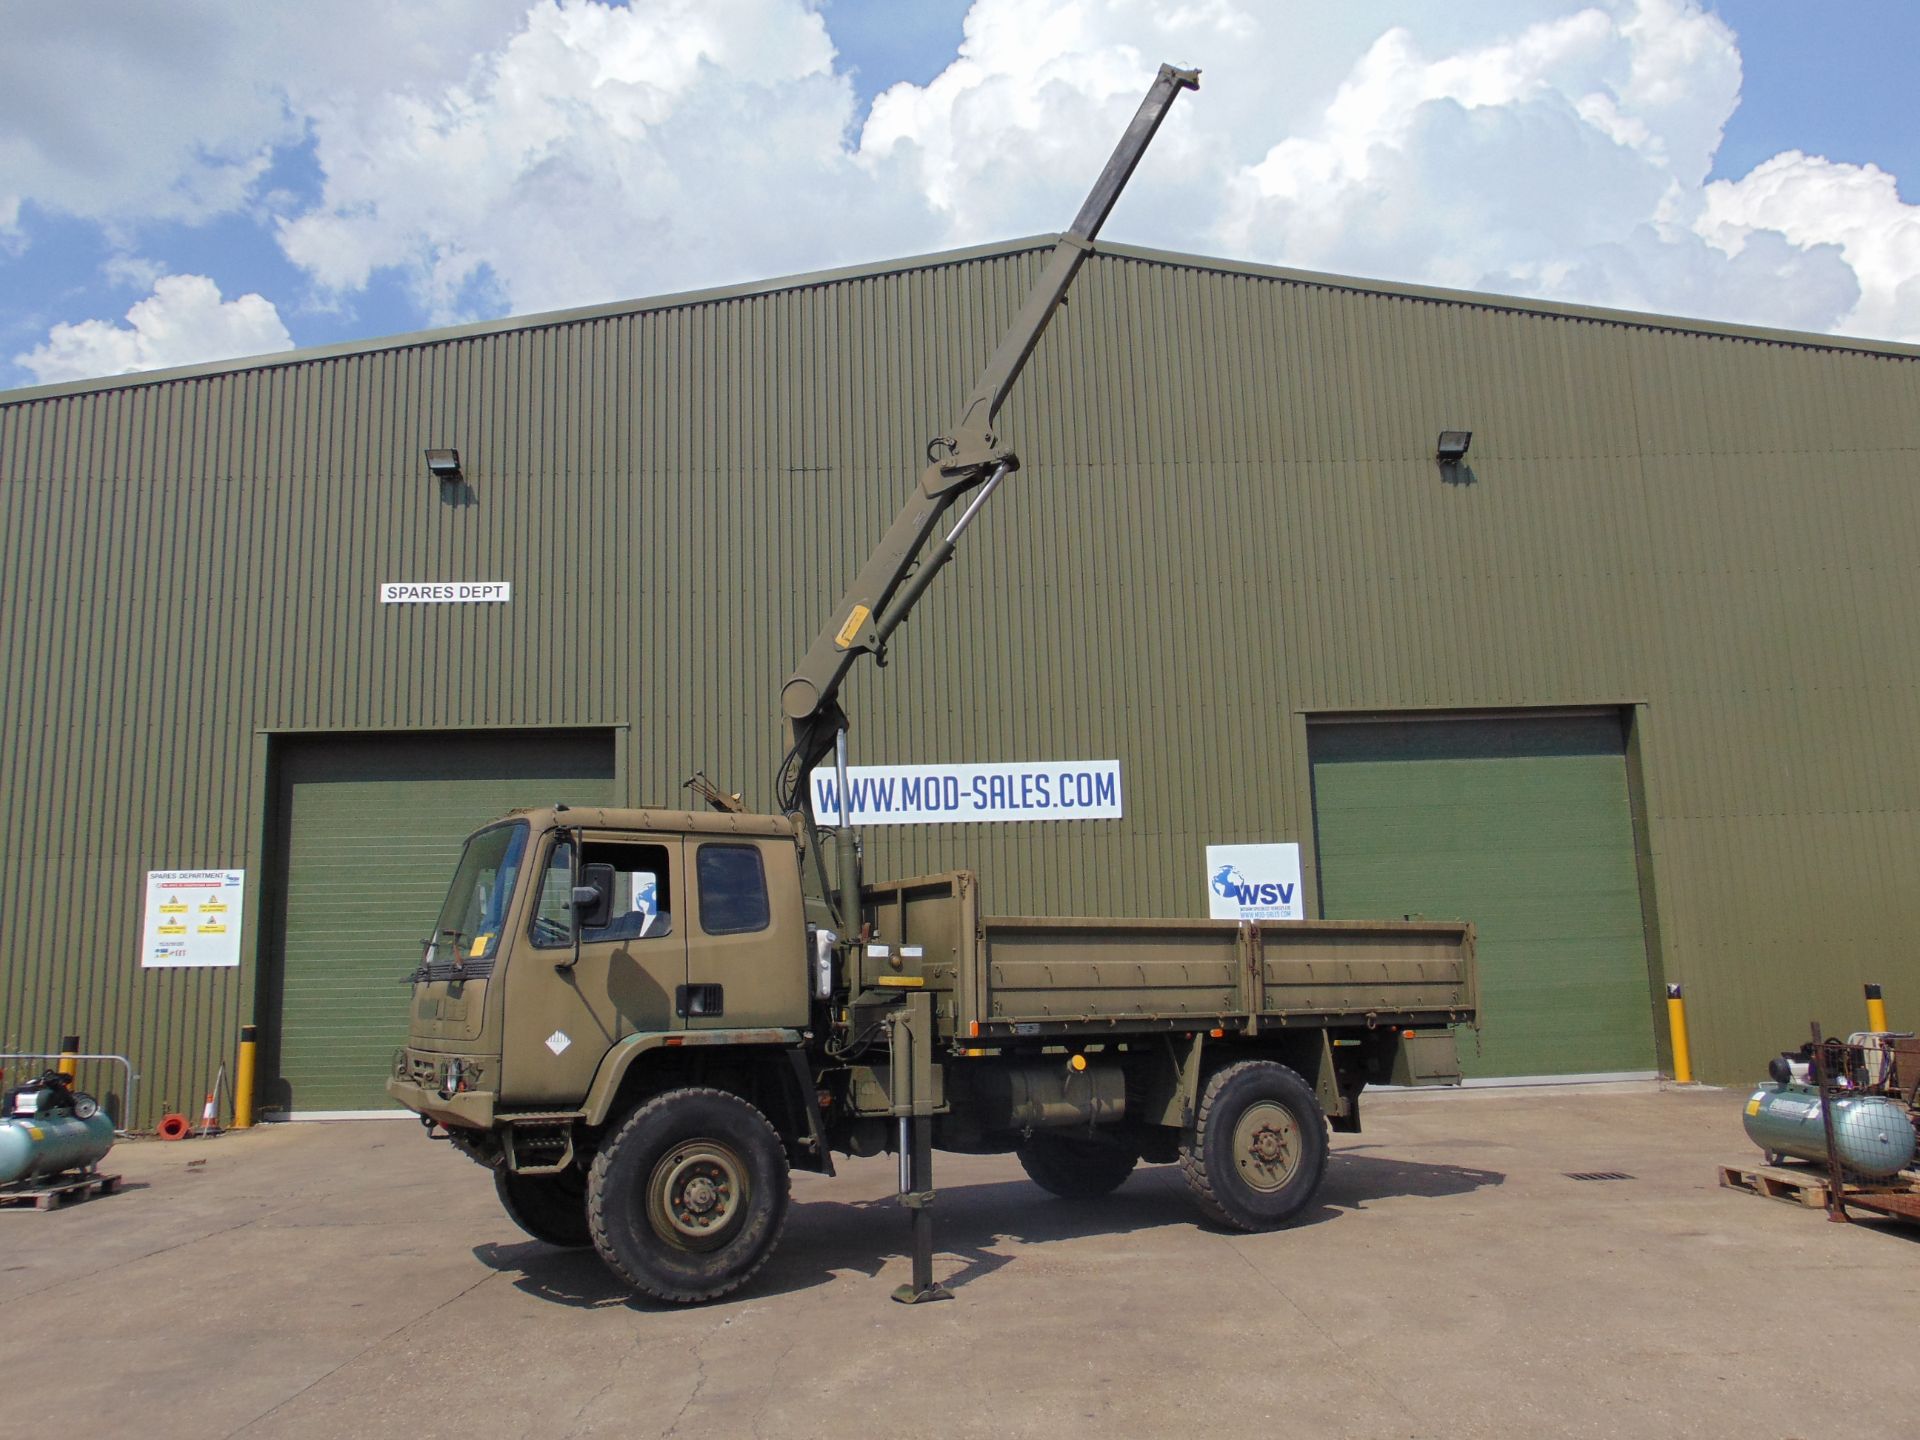 LHD Leyland DAF 4X4 Truck complete with Atlas Crane - Image 3 of 26